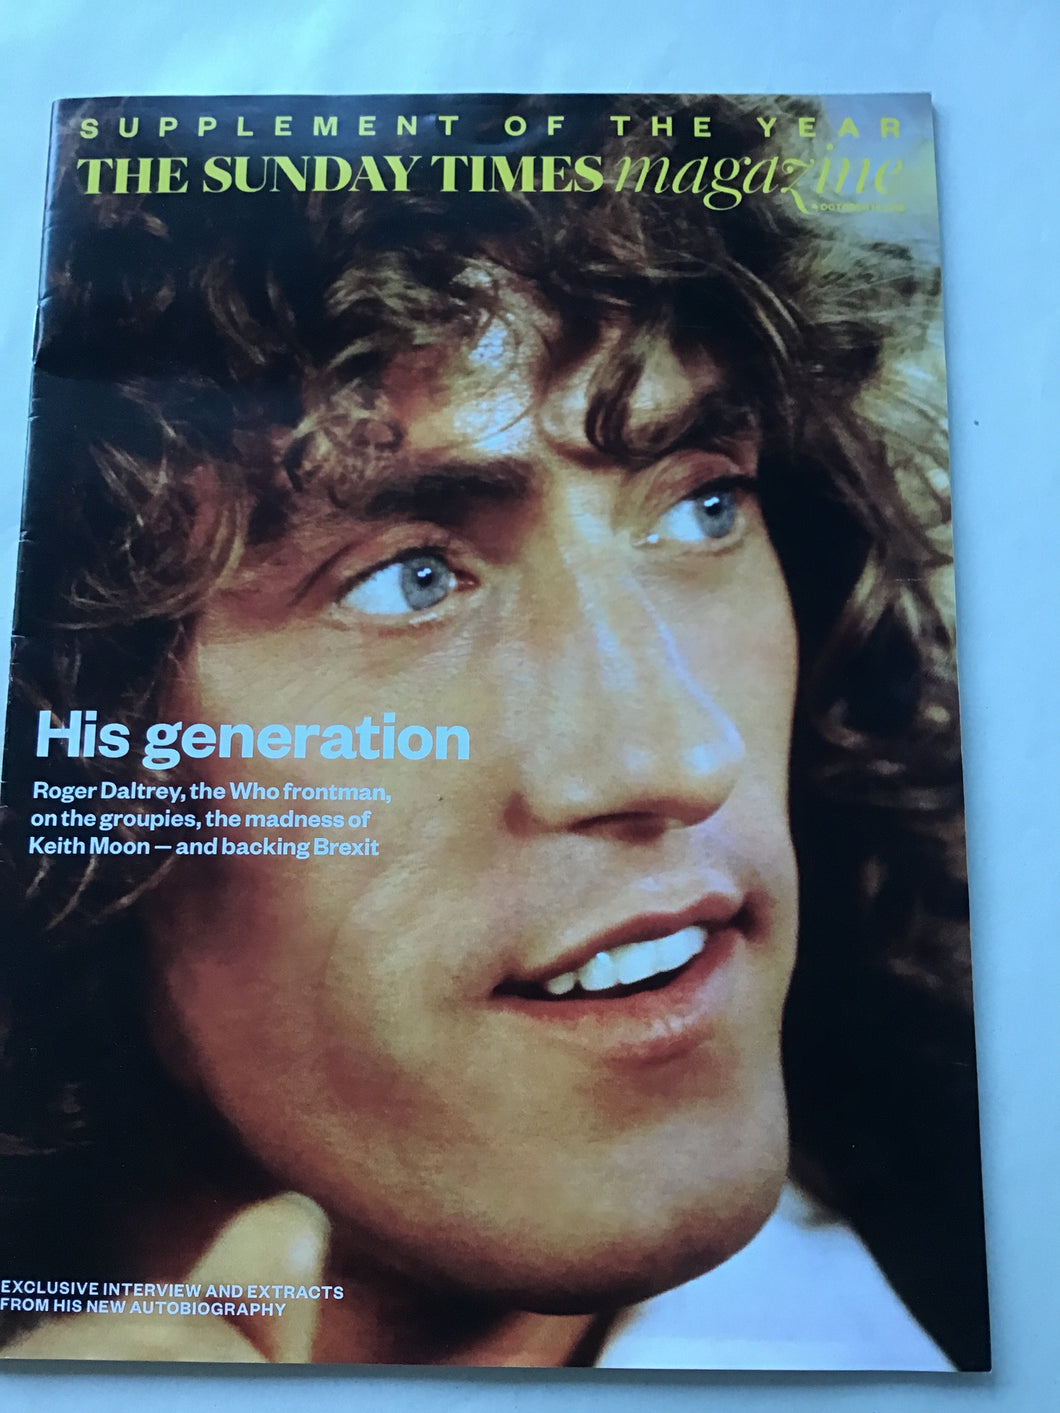 Supplement of the year Sunday Times magazine October 14, 2018 his generation Roger Daltrey from one of the who interview